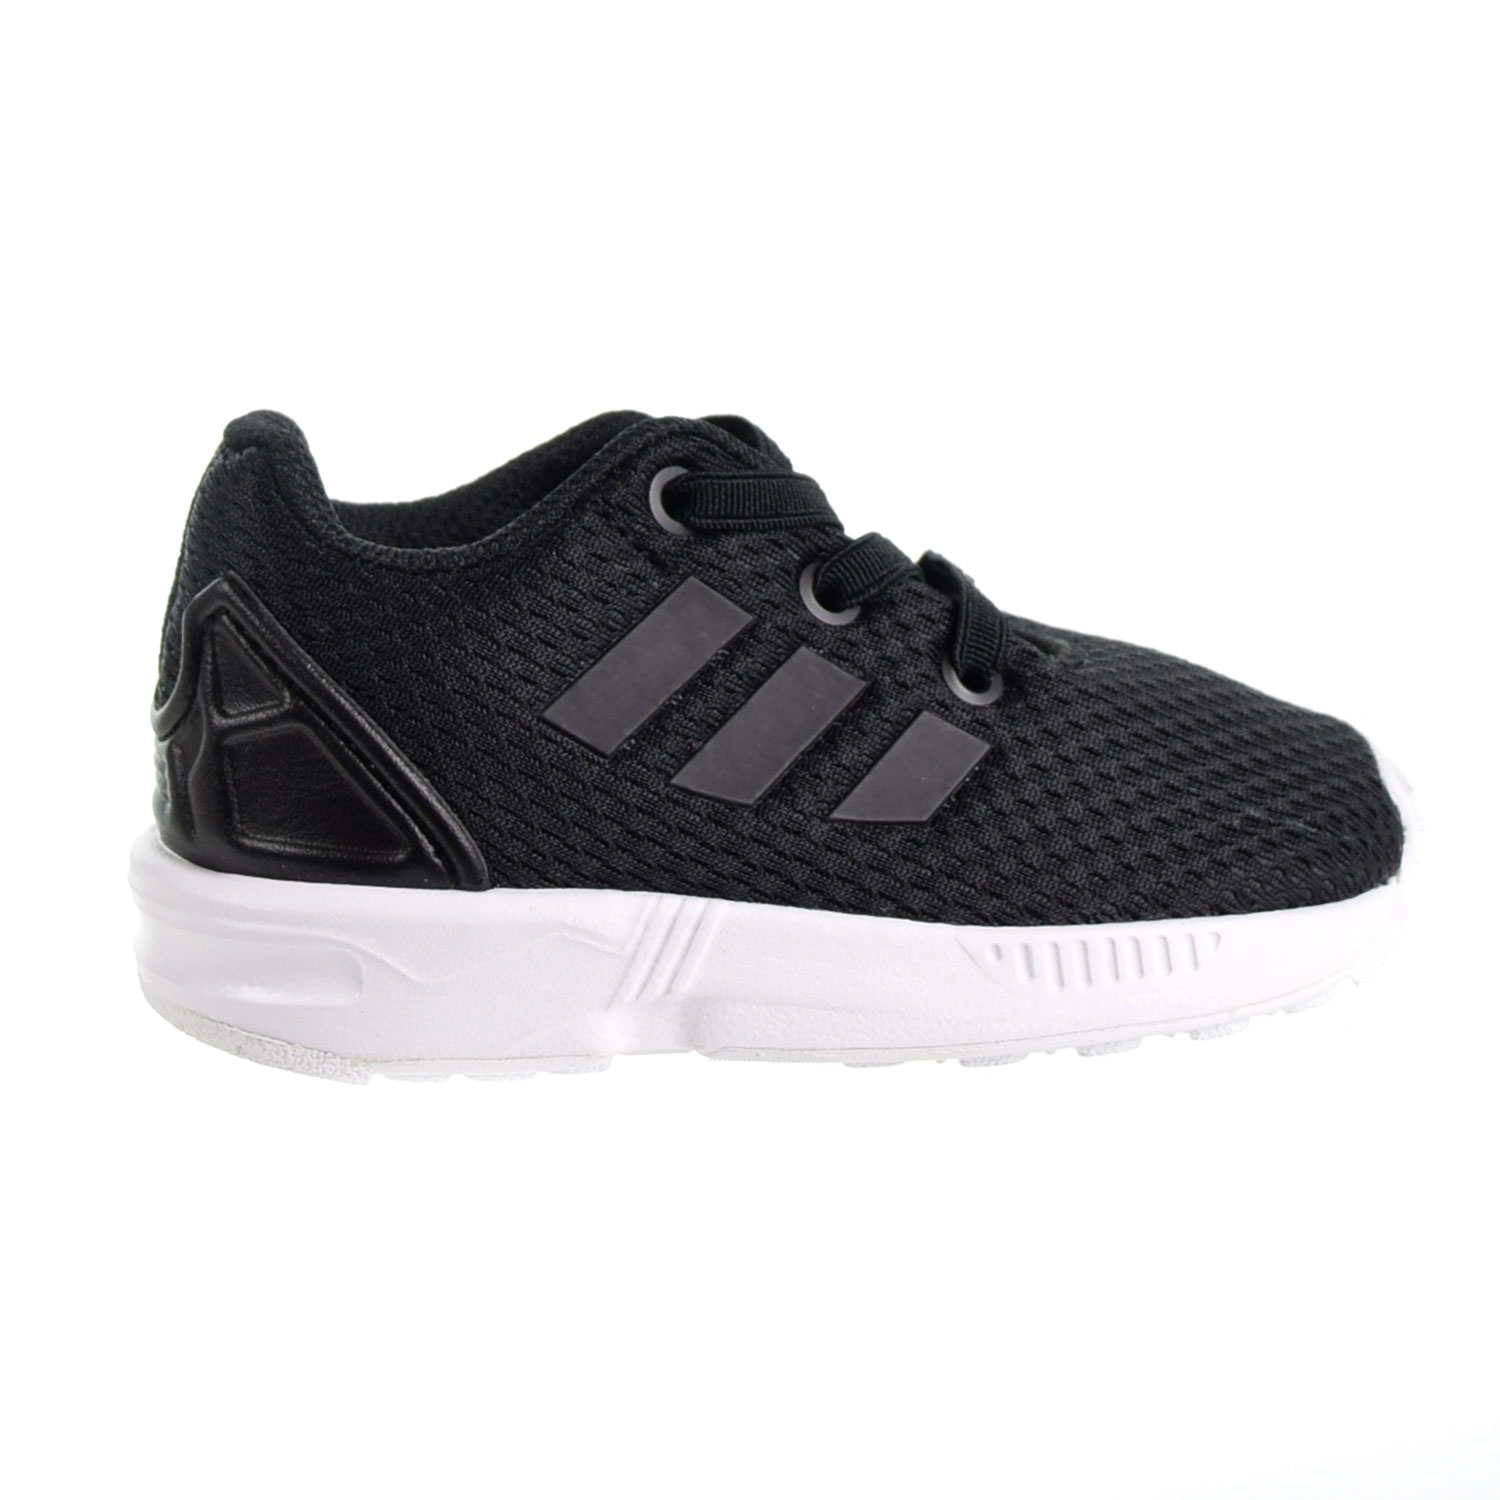 Details about Adidas ZX Flux I Toddler's Shoes Black-White M21301